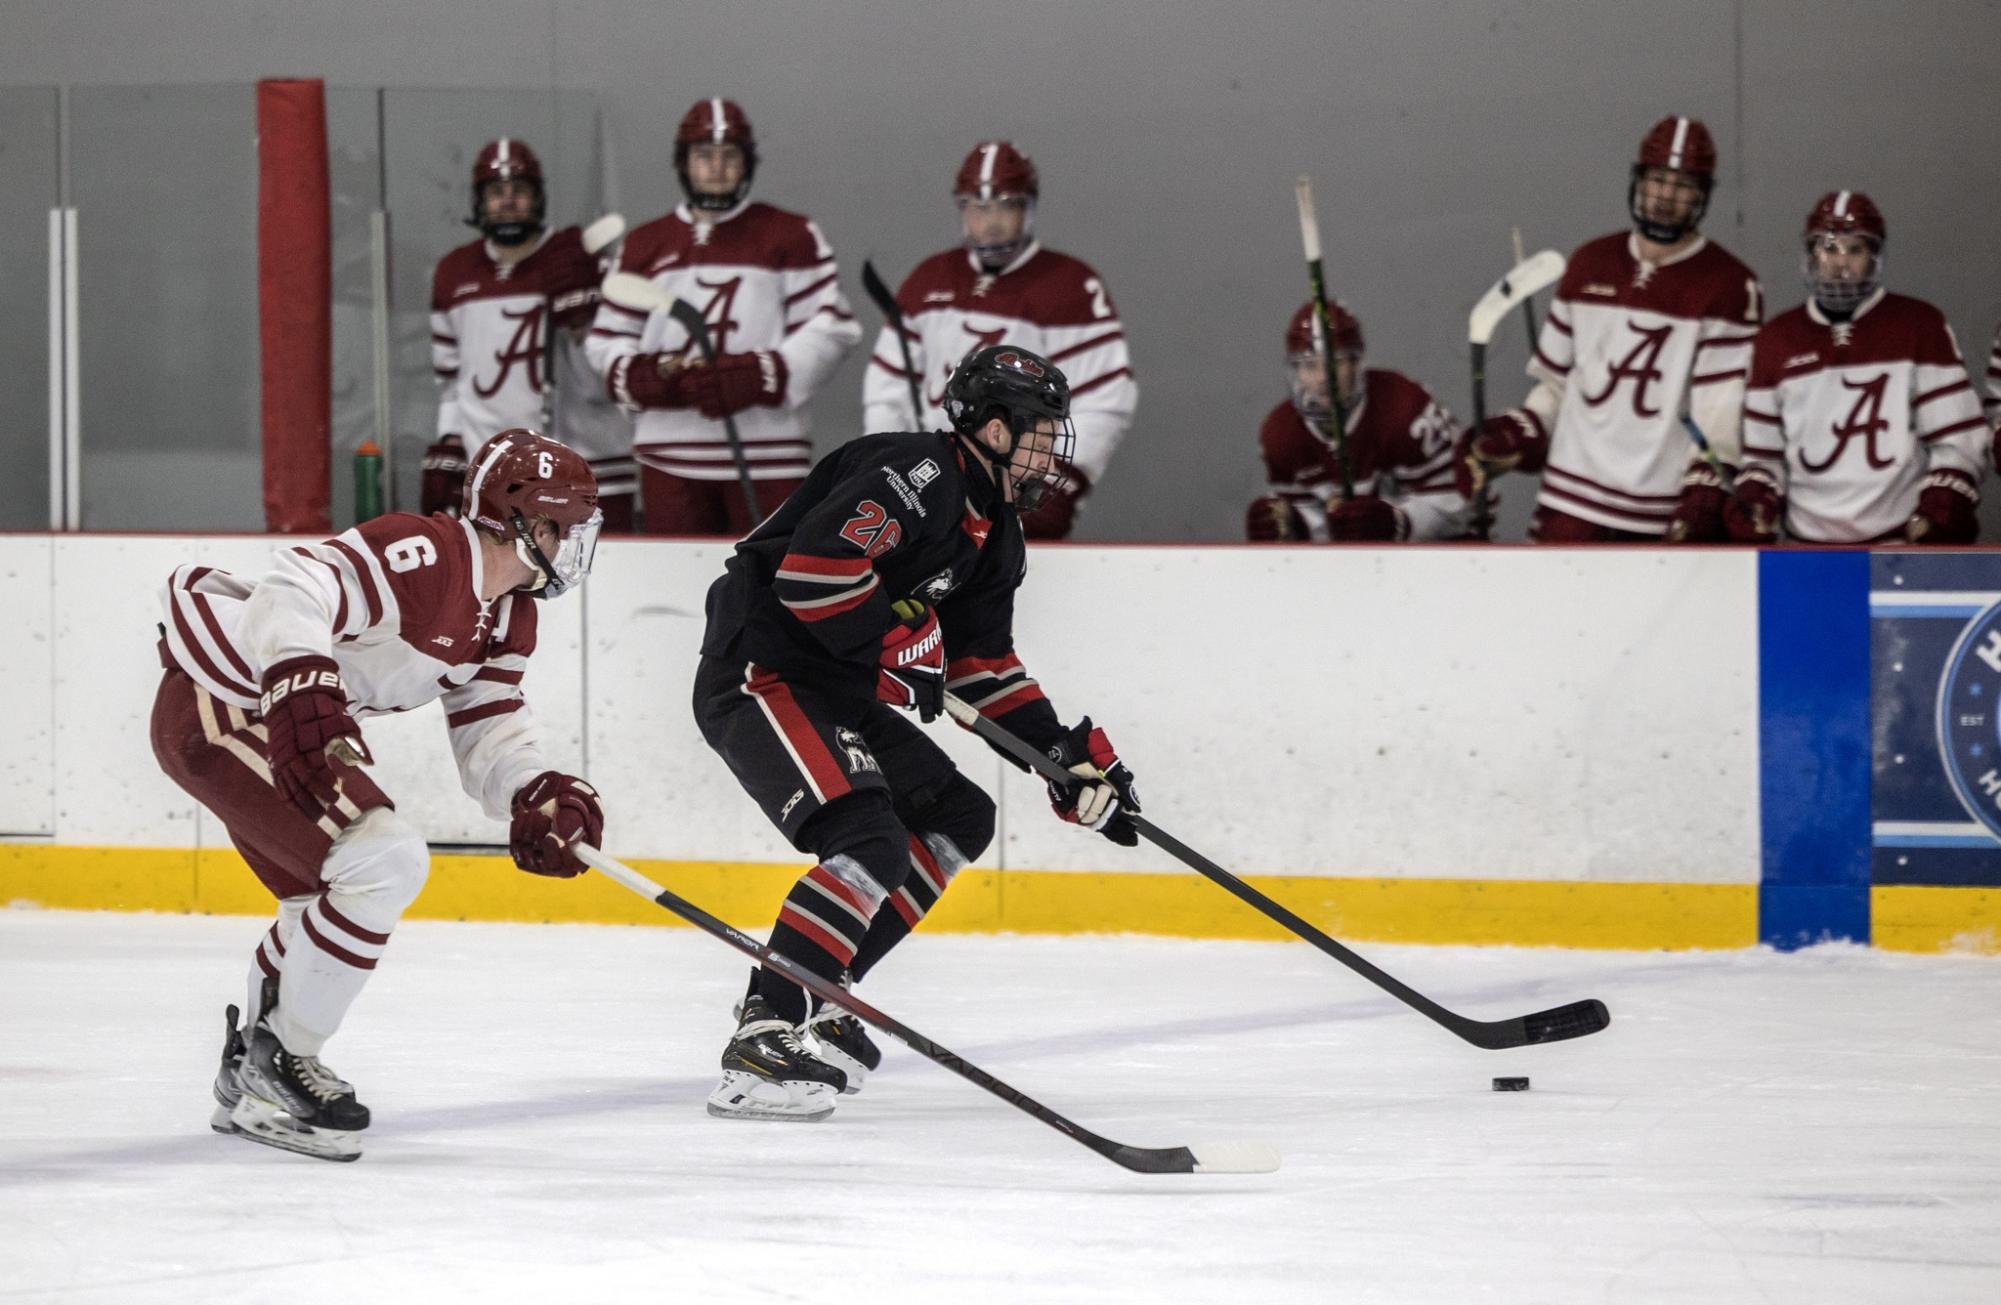 Freshman forward Jeff Shirkey carries the puck into the offensive zone on Nov. 17 against Alabama. The Huskies are gearing up to take on No. 11 ranked Purdue University Northwest this weekend. (Courtesy of NIU Hockey)